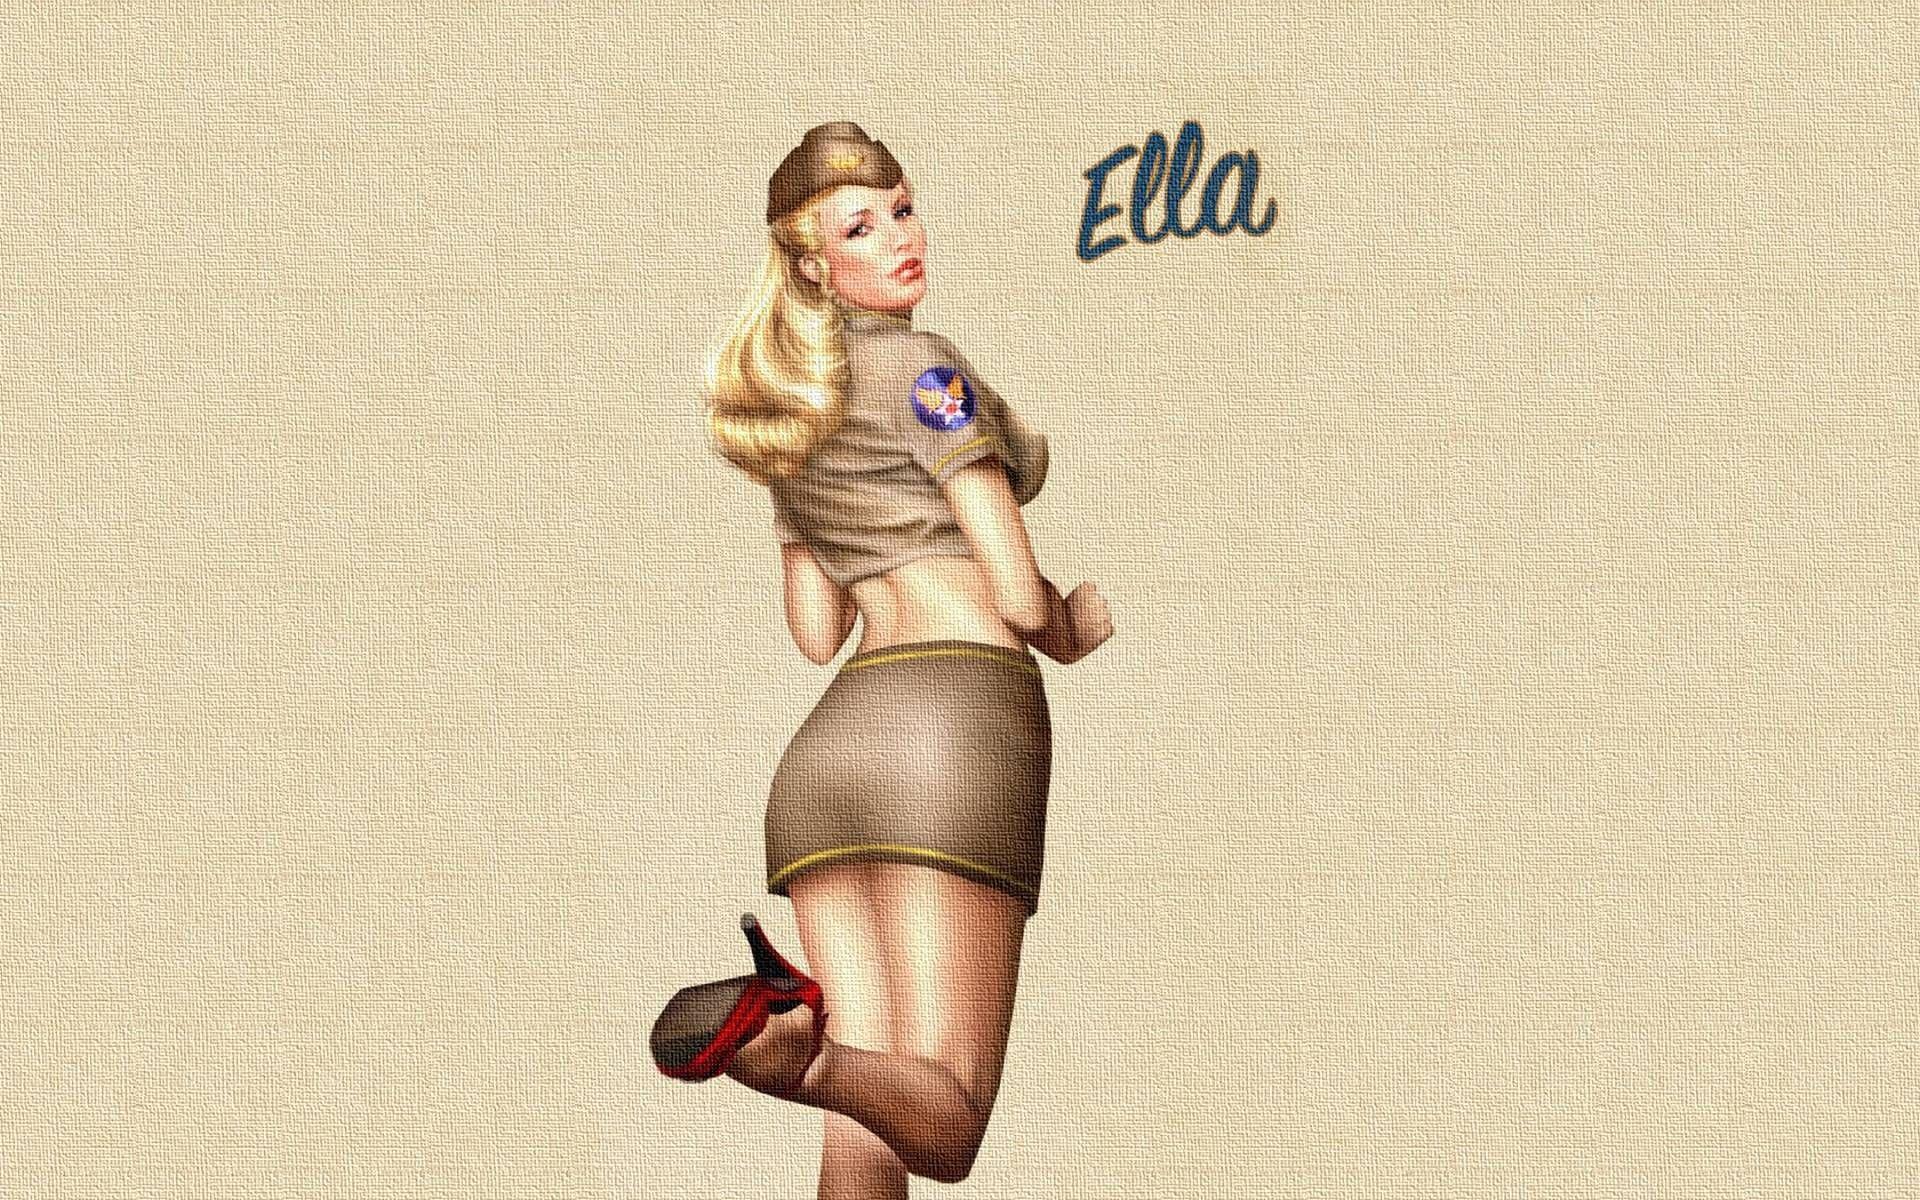 Tattooed Pin Up Girl Wallpaper. Army Pinup Wallpaper 1920×1200